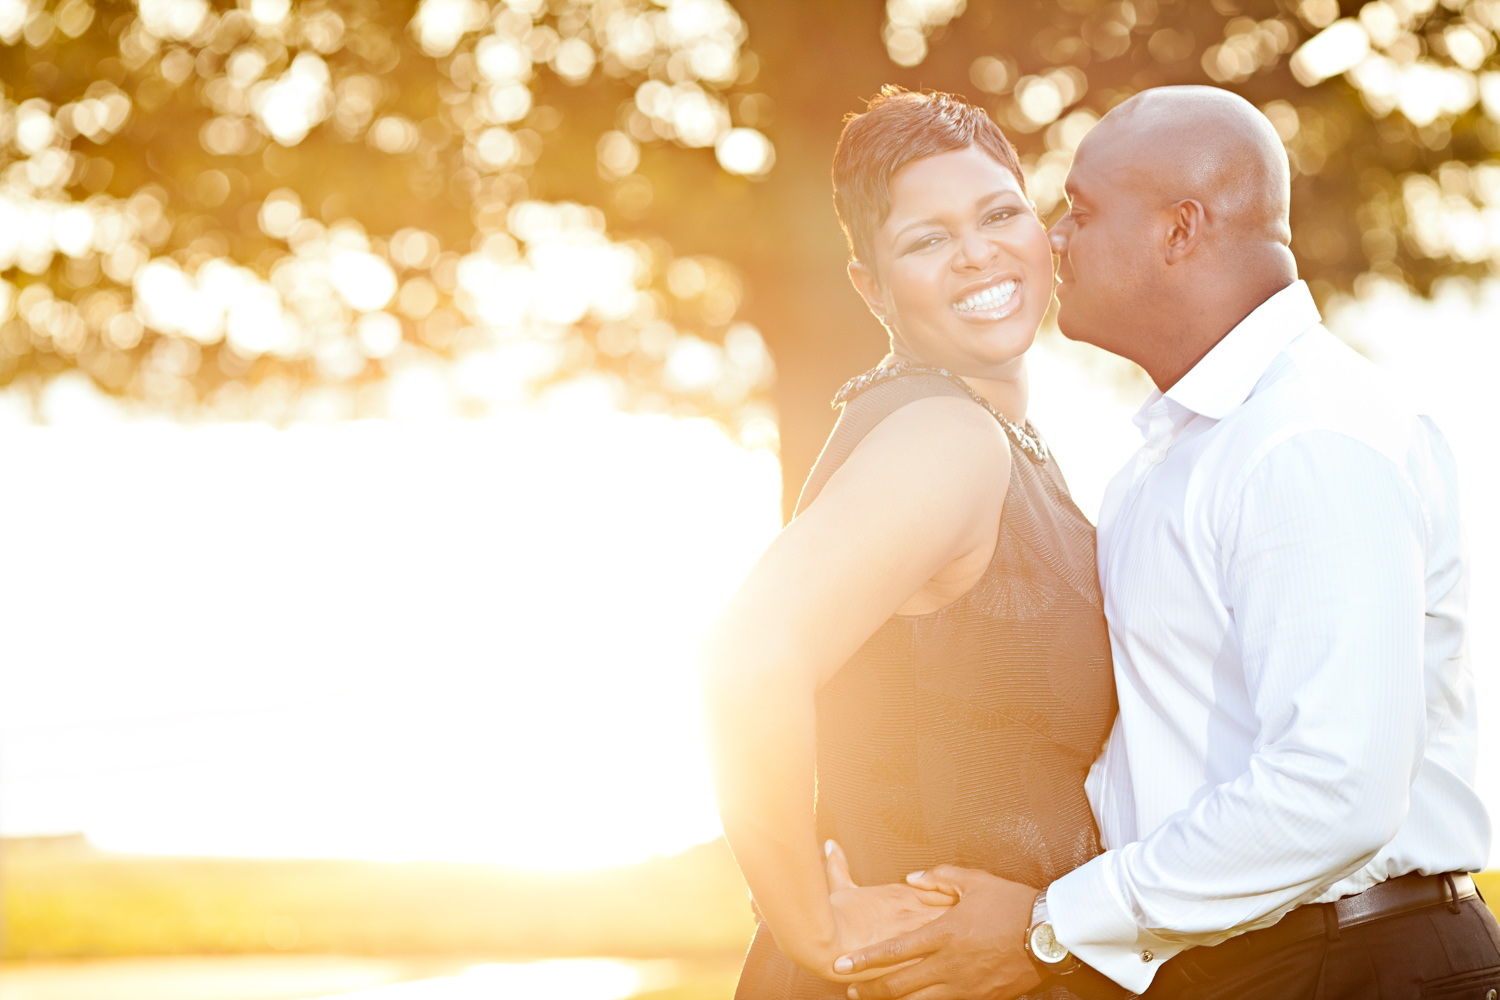 This engagement session was in Alexandria, Virginia, This black couple is nuzzling with the sun rising behind them, The warm glow of the sun is radiating throughout the photo, She is in a black dress and he is in a suit, Her smile is absolutely joyful, Procopio Photography, best top Washington DC photographer, best top Maryland photographer, best top Virginia photographer, best top DMV photographer, best top wedding photographer, best top commercial photographer, best top portrait photographer, best top boudoir photographer, modern fine art portraits, dramatic, unique, different, bold, editorial, photojournalism, award winning photographer, published photographer, memorable images, be different, stand out, engagement photography